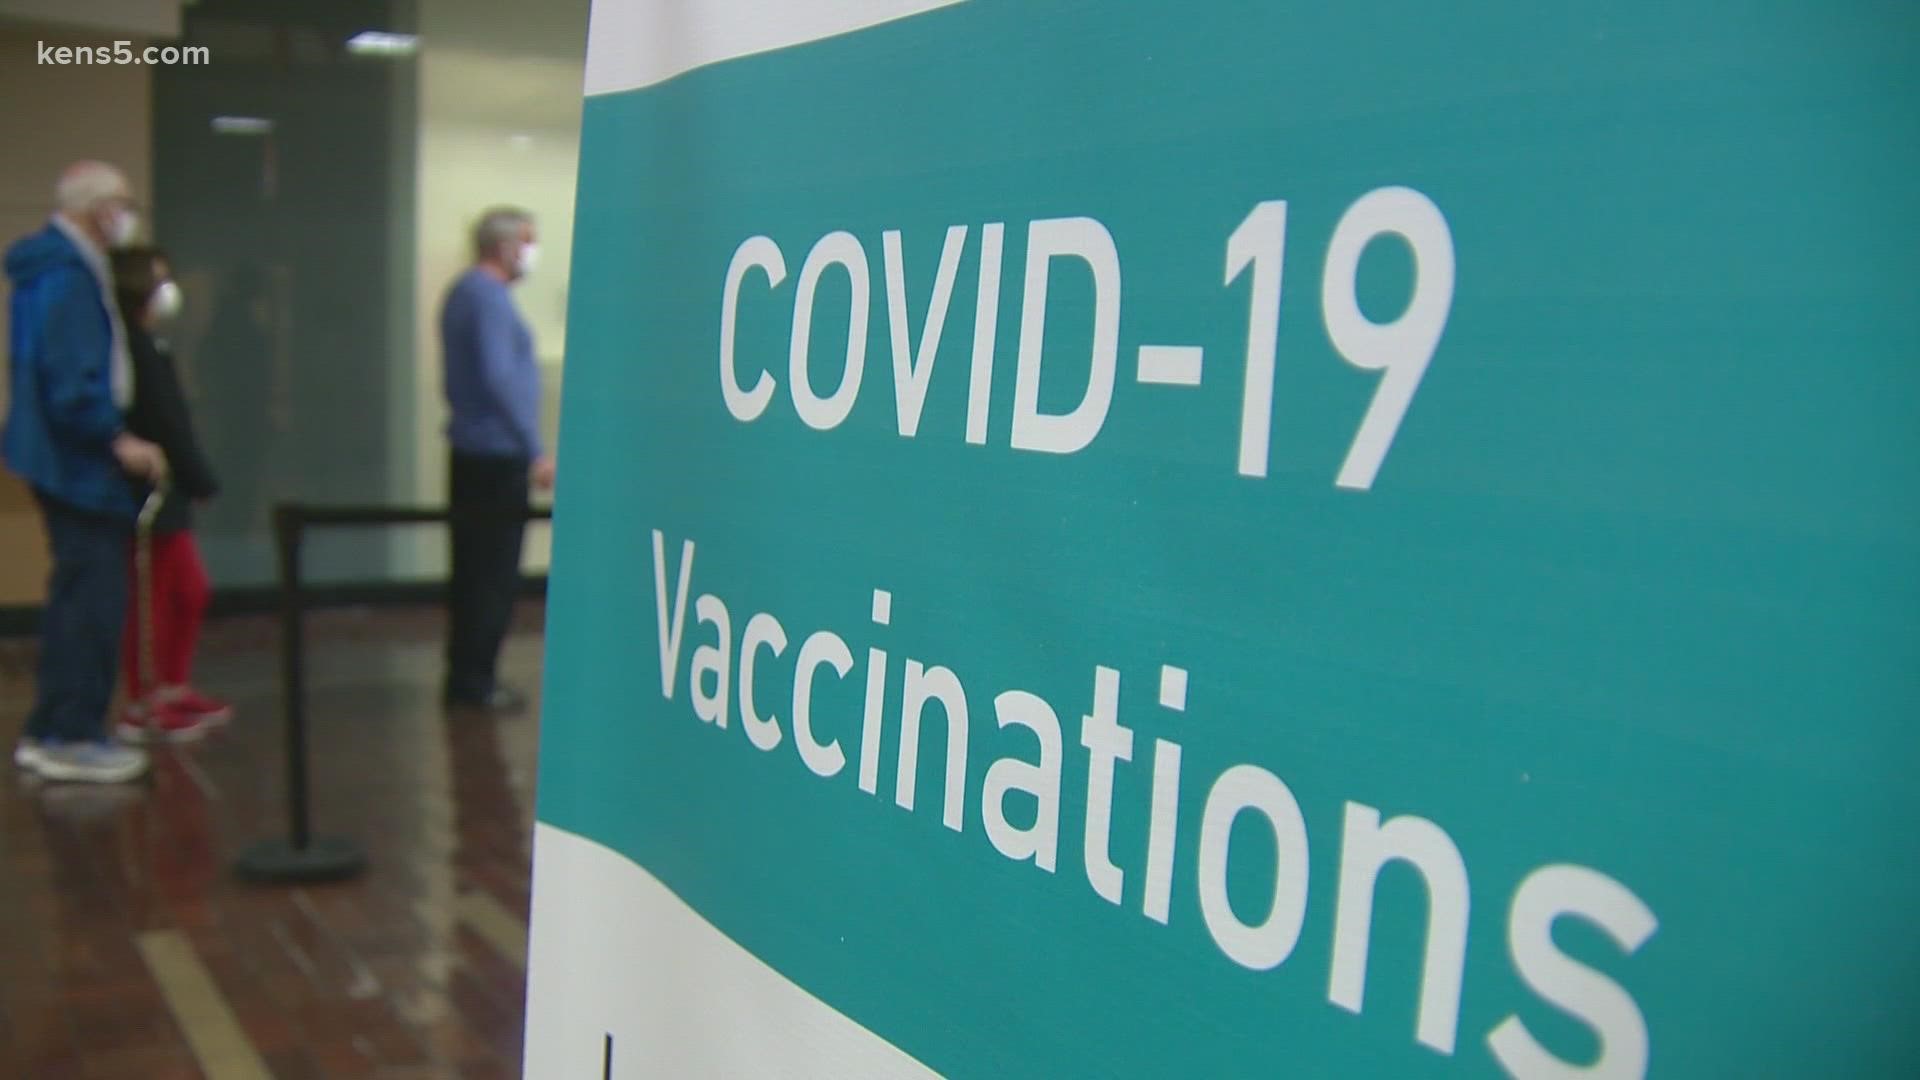 City leaders are trying to go after those who have not gotten the vaccine. They say it's the best protection.